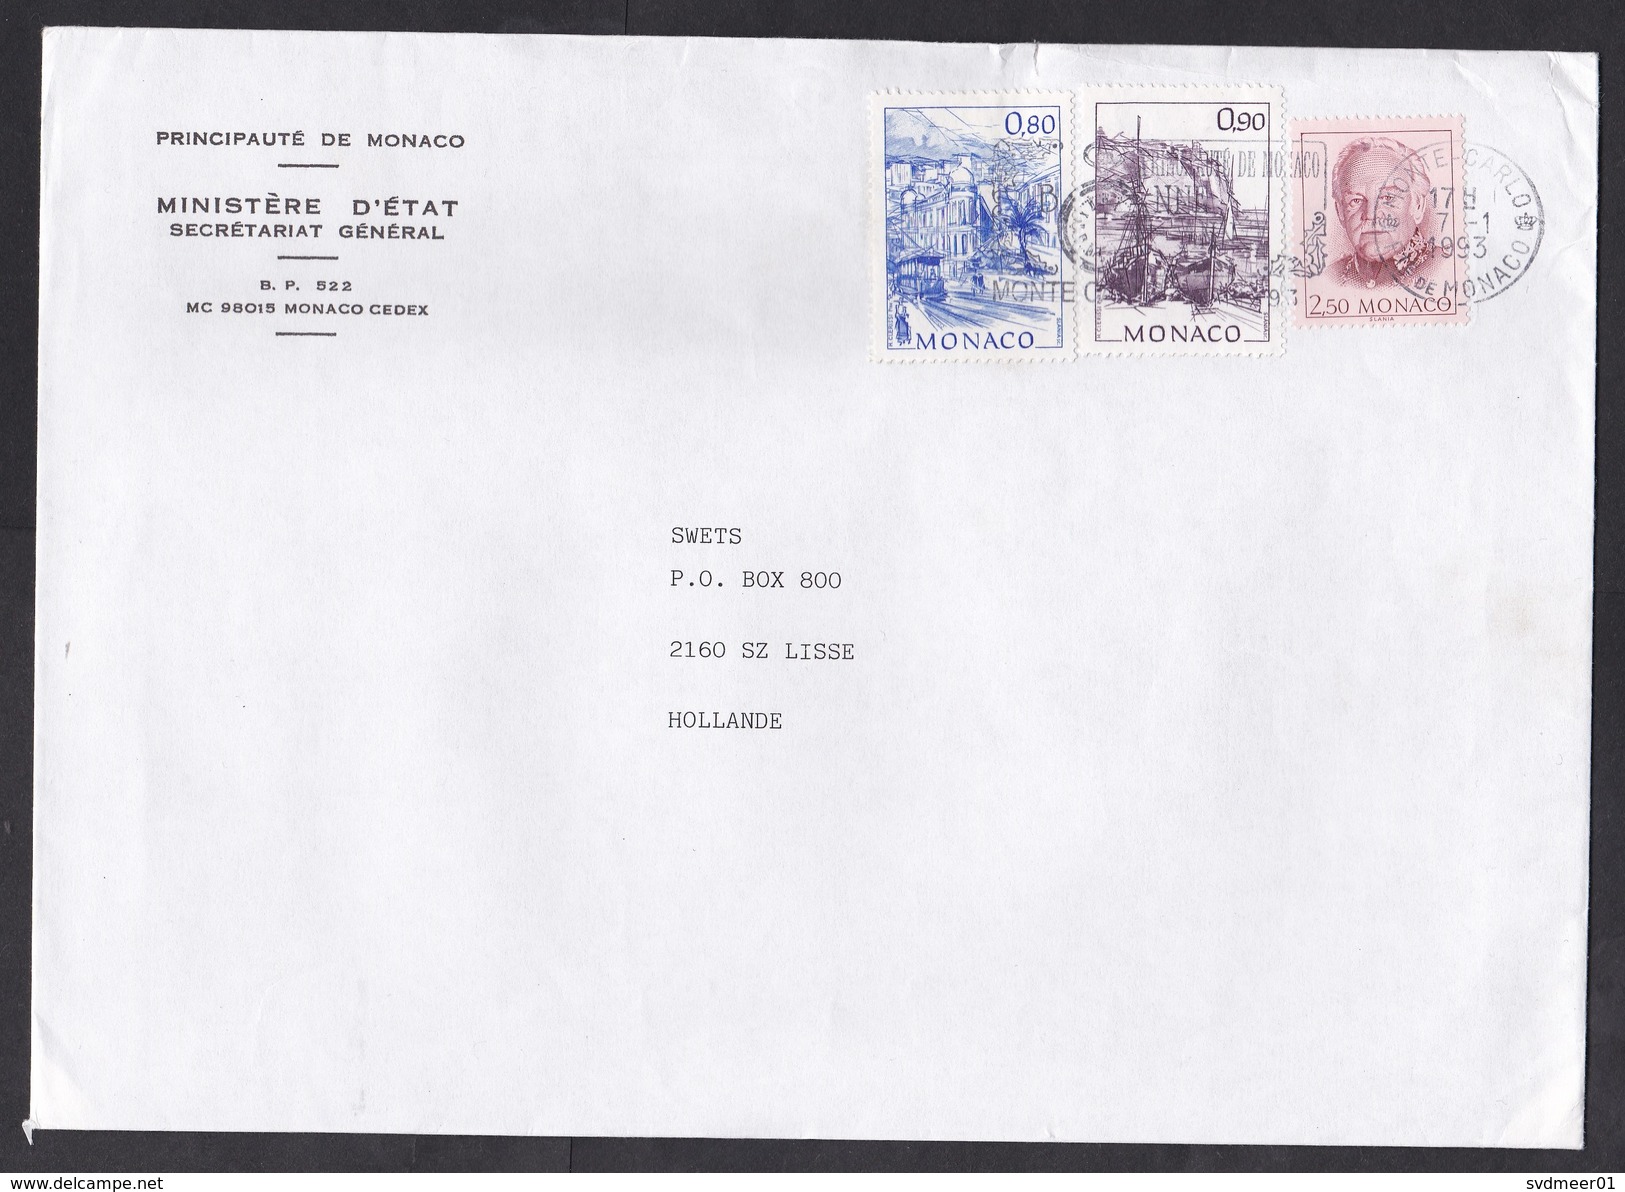 Monaco: Cover To Netherlands, 1993, 3 Stamps, Ship, Tram, Sent By Ministry Of State (minor Damage, See Scan) - Covers & Documents